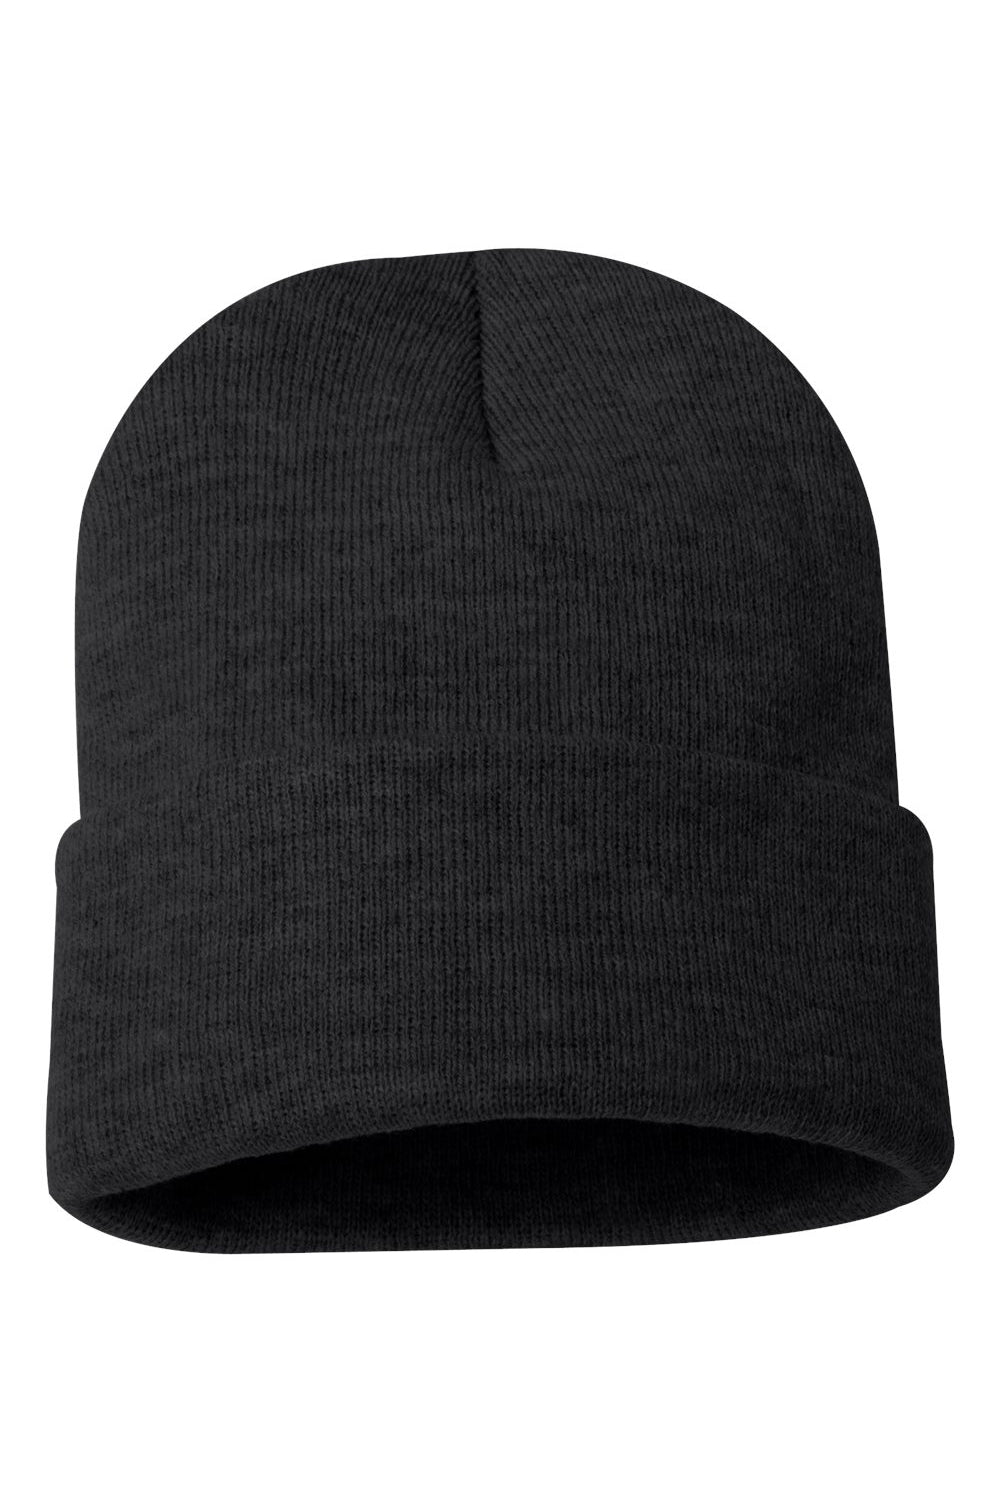 Sportsman SP12 Mens Solid Cuffed Beanie Heather Charcoal Grey Flat Front